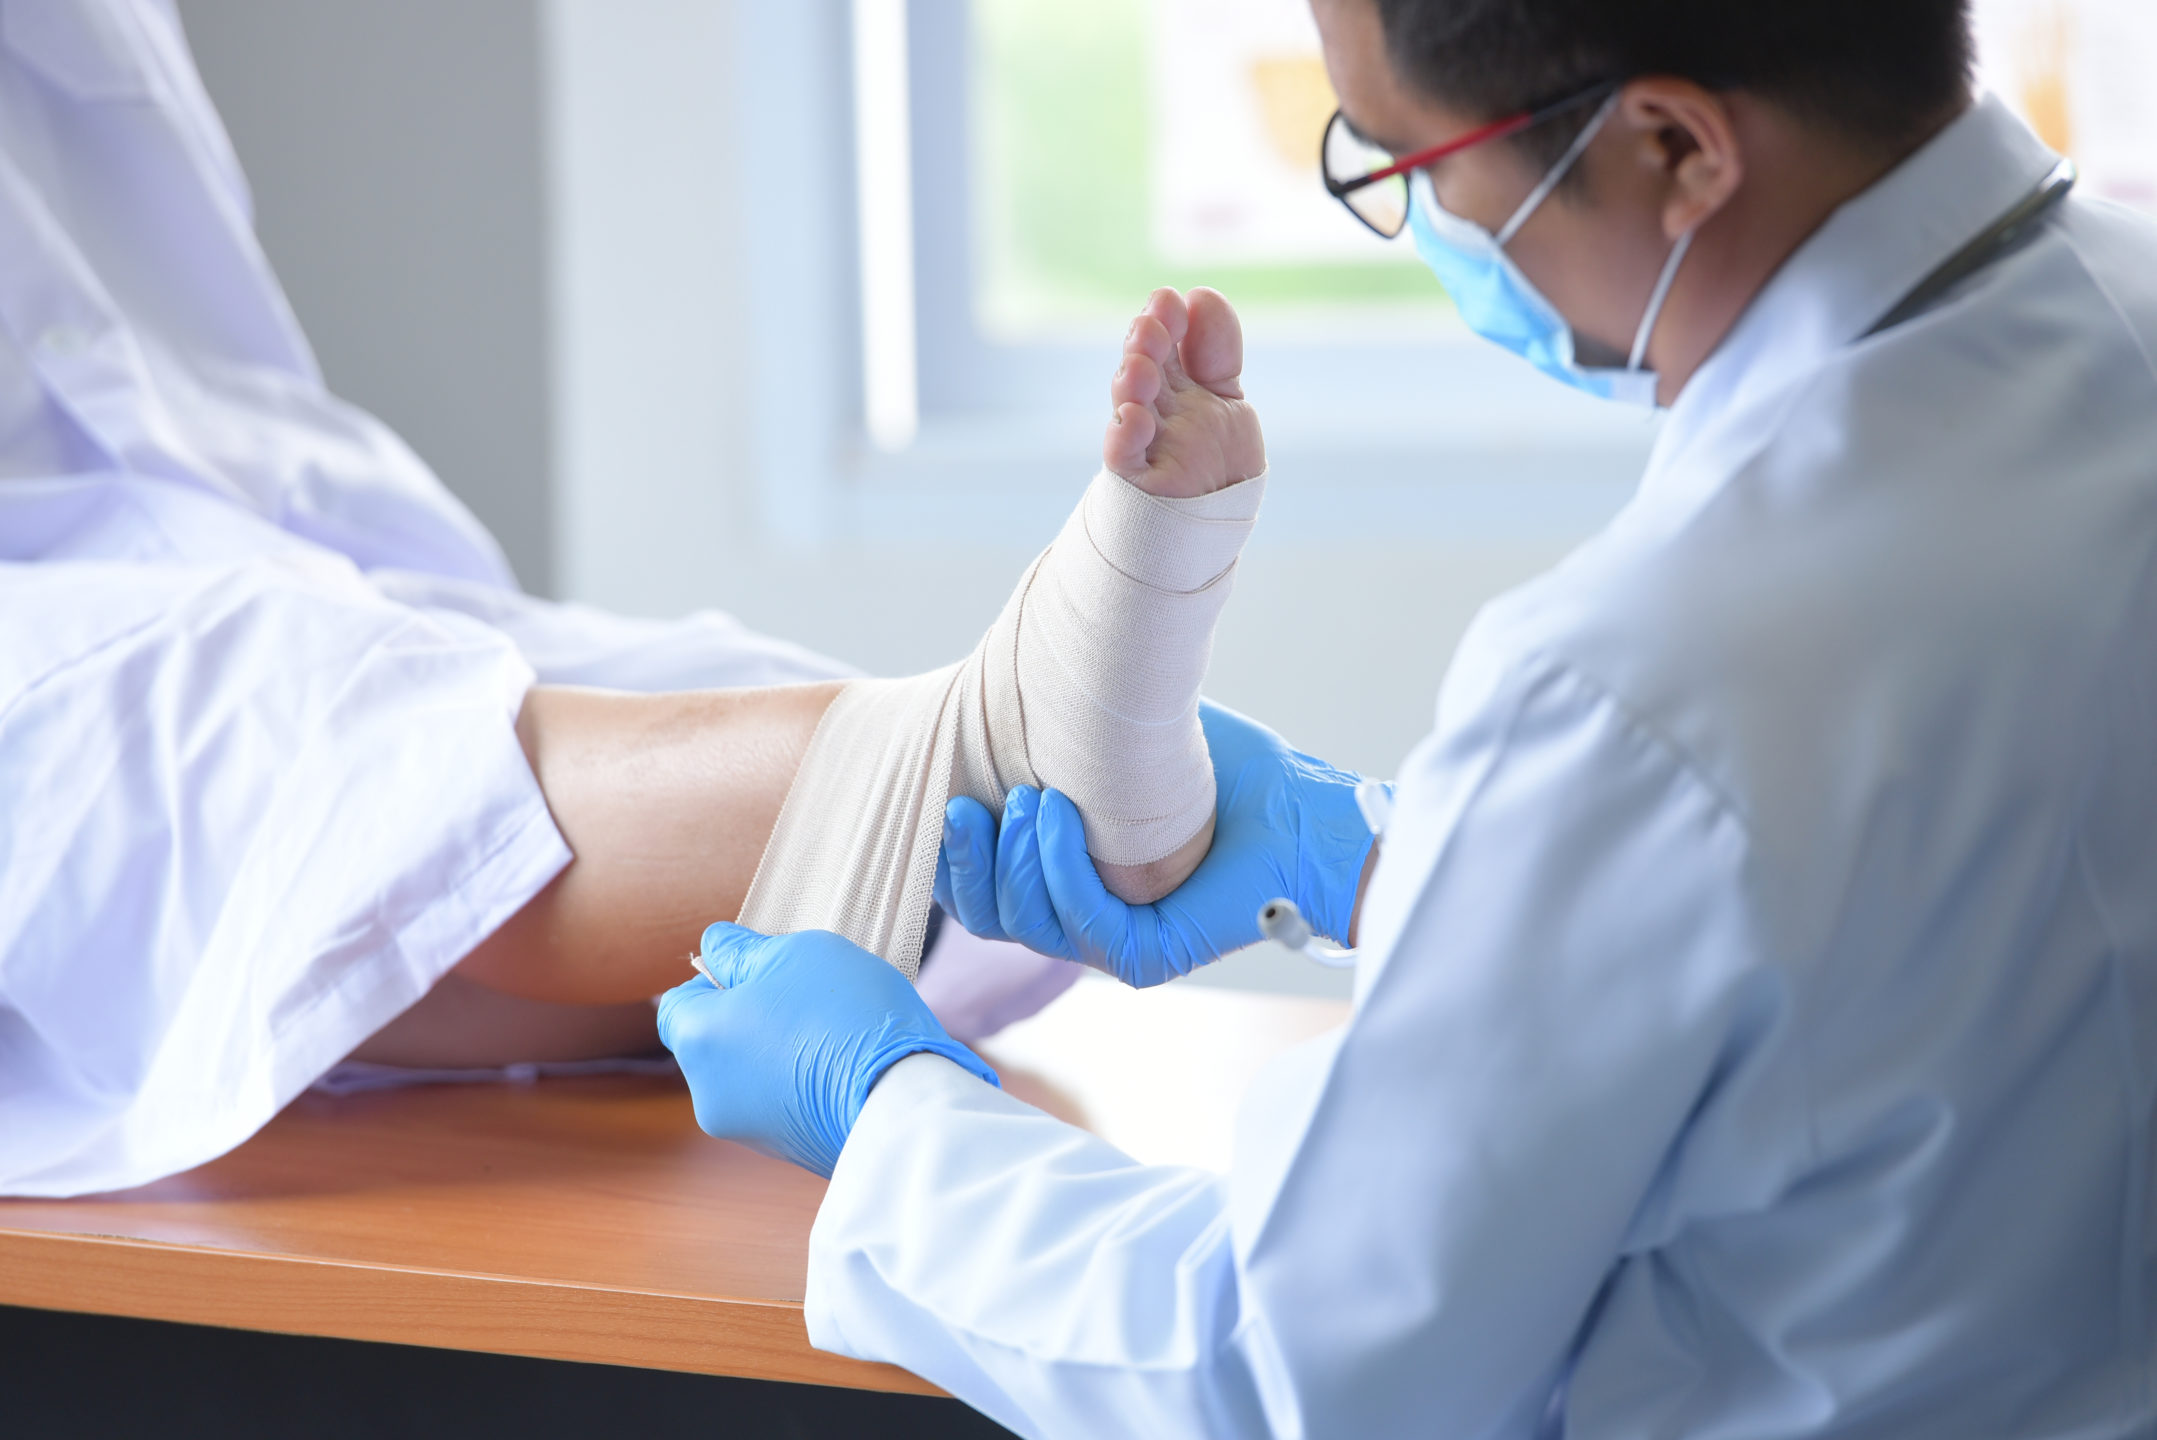 Image of podiatrist wrapping a patient’s foot.